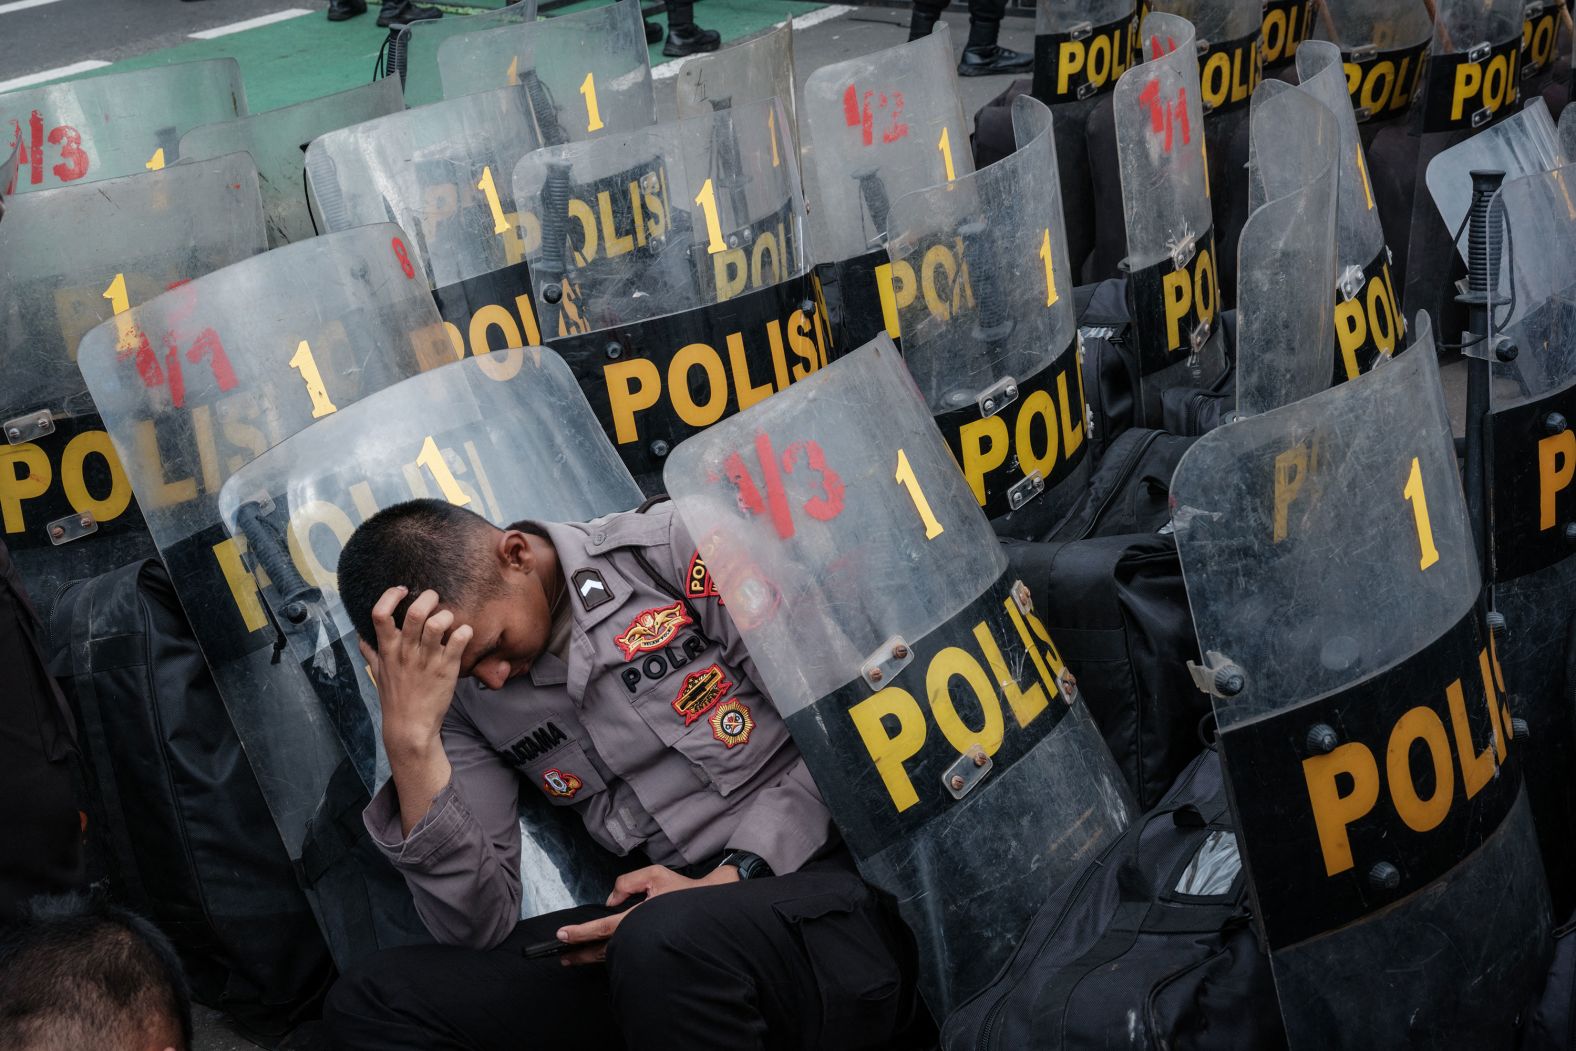 A police officer rests among shields in Jakarta, Indonesia, during a demonstration demanding the impeachment of Indonesian President Joko Widodo on Tuesday, March 5.